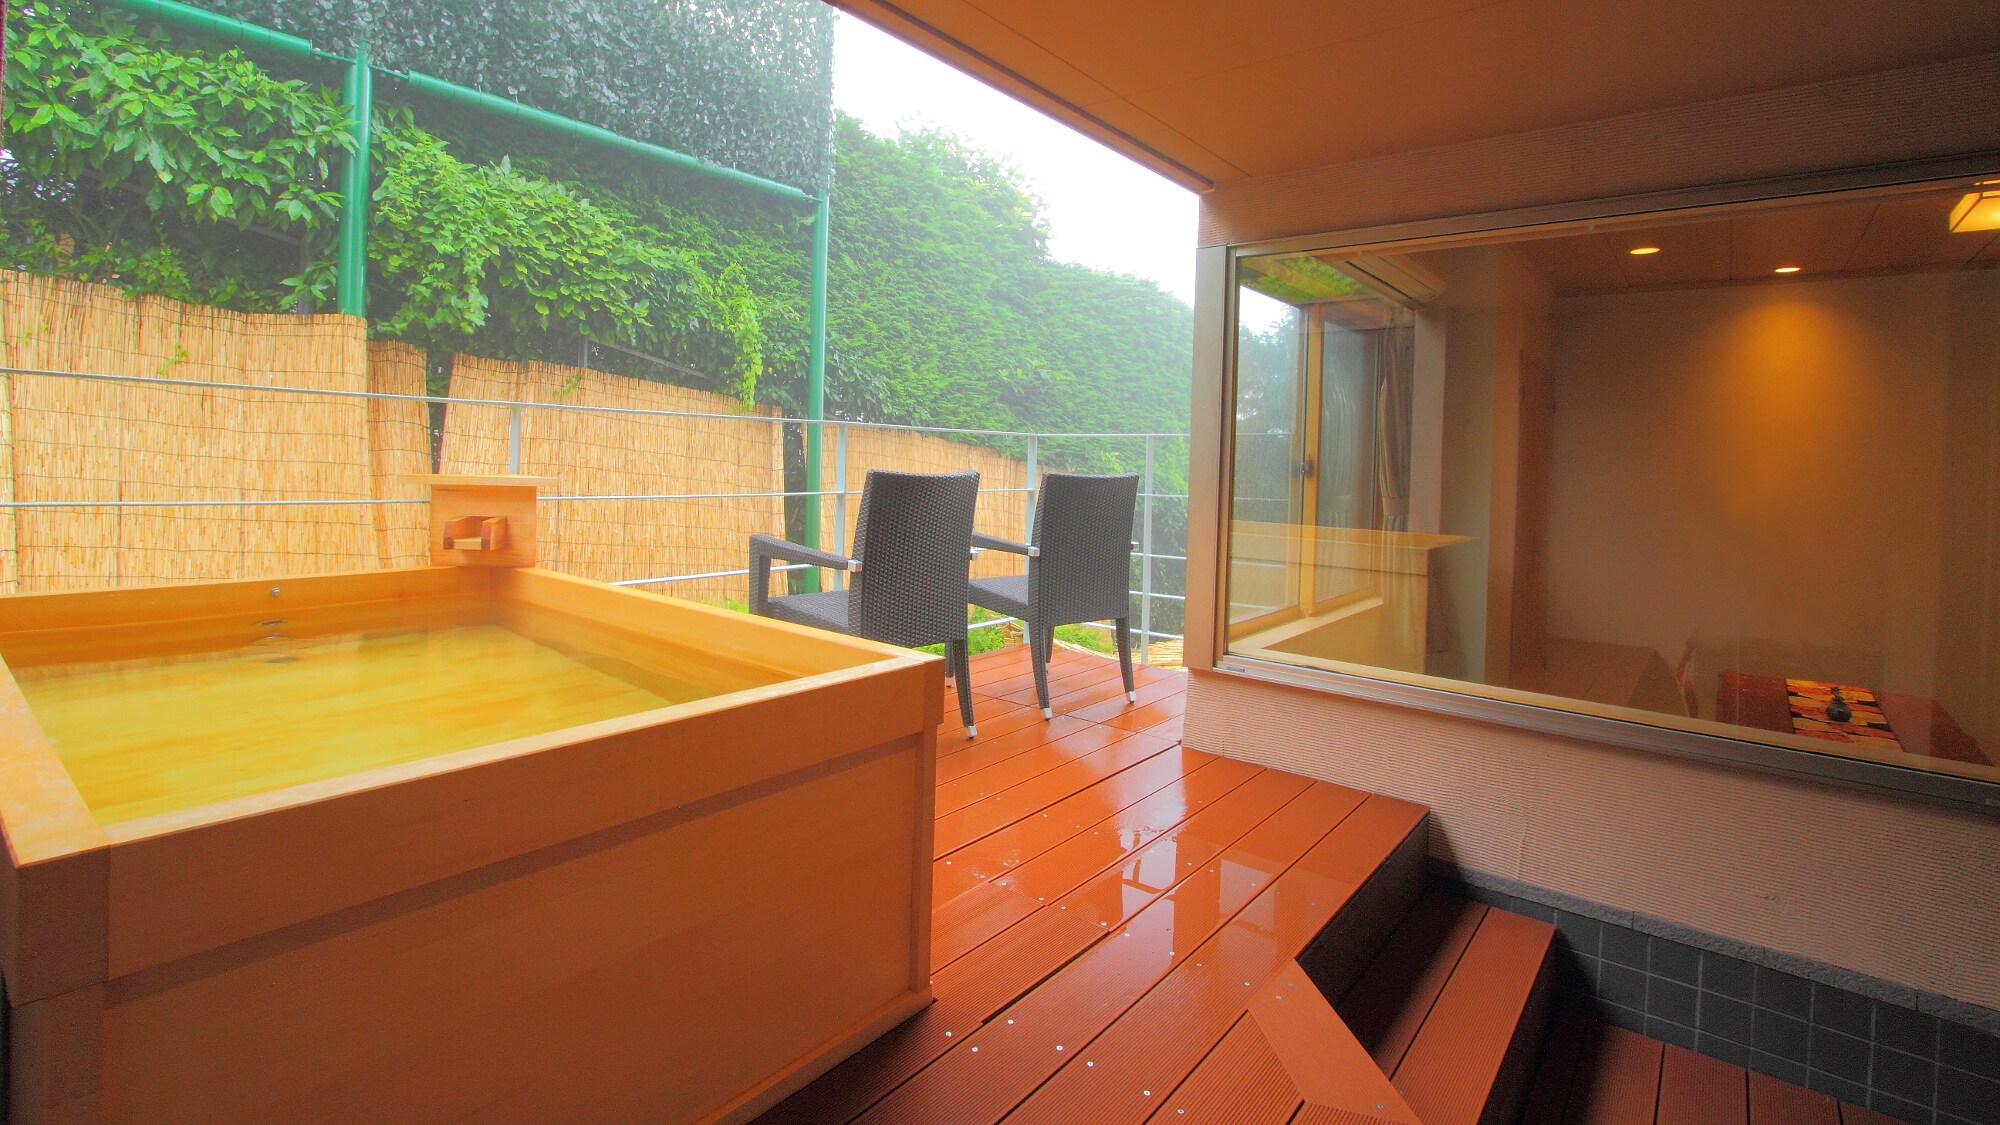 An example of an open-air bath in a guest room (Hinoki: 208 Glitter)